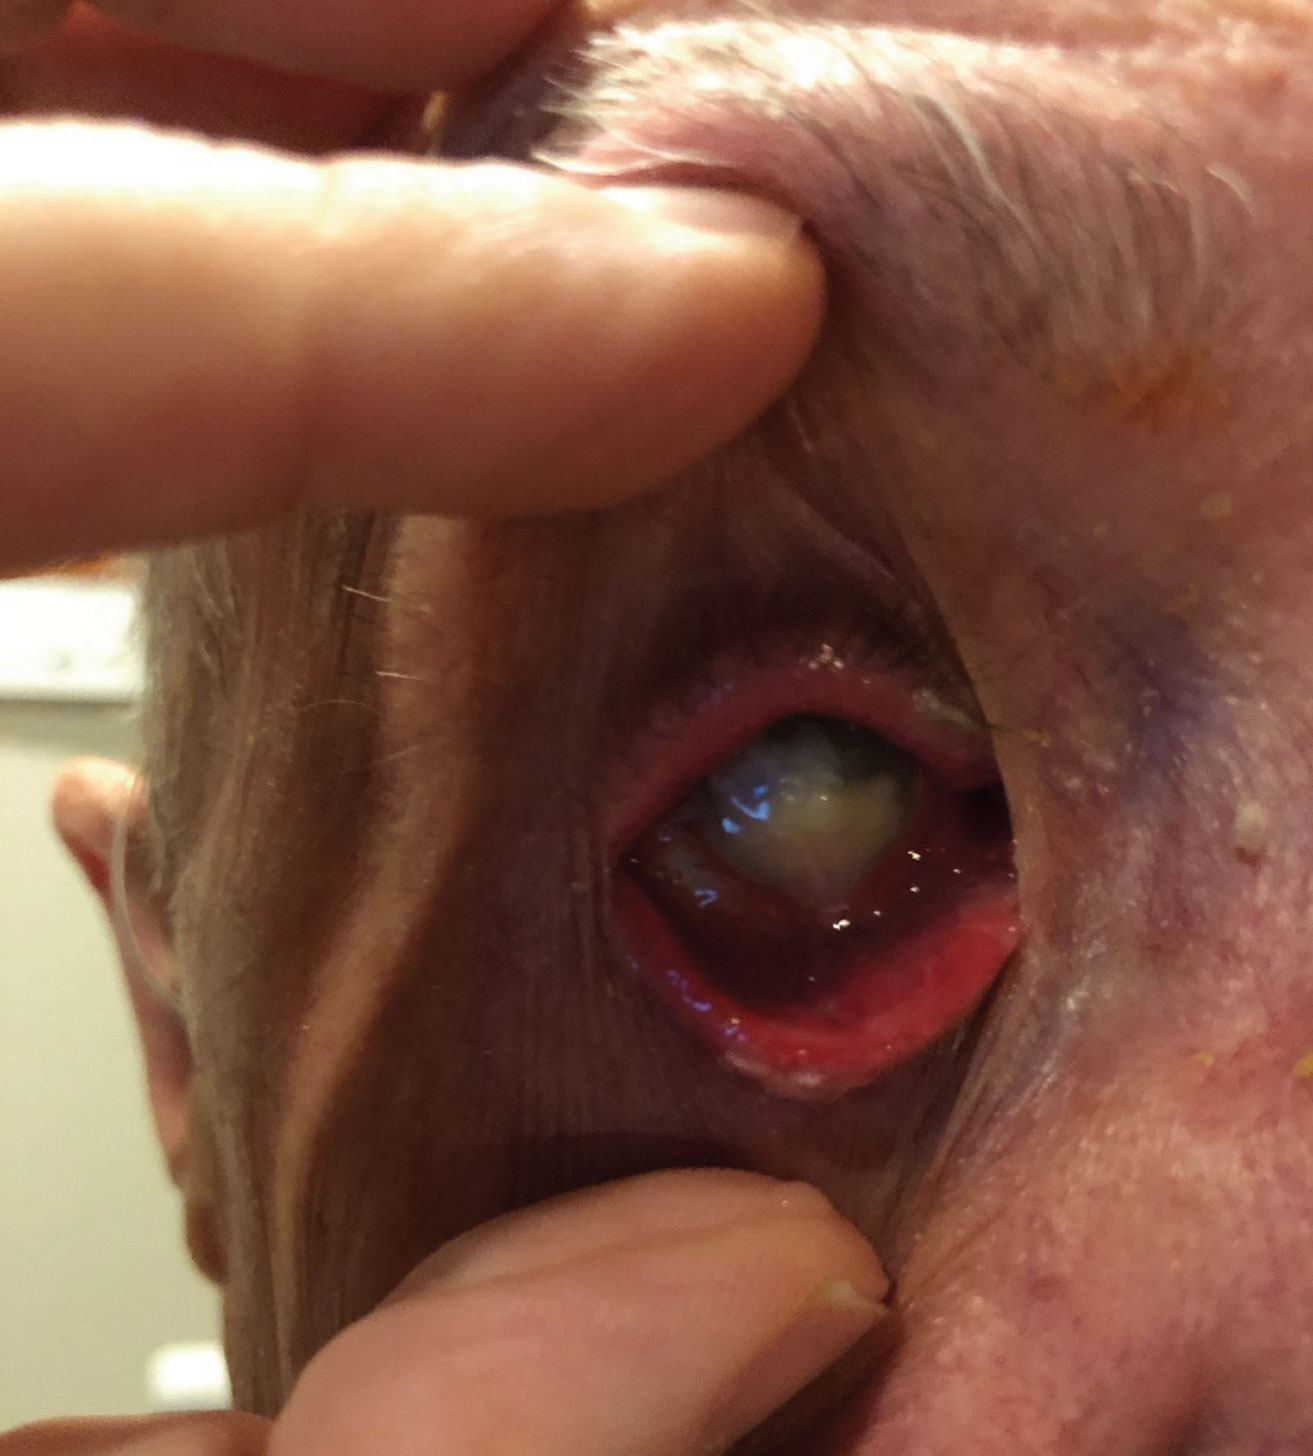 This patient presented with severe pain secondary to endophthalmitis that he developed after being noncompliant following a corneal transplant.